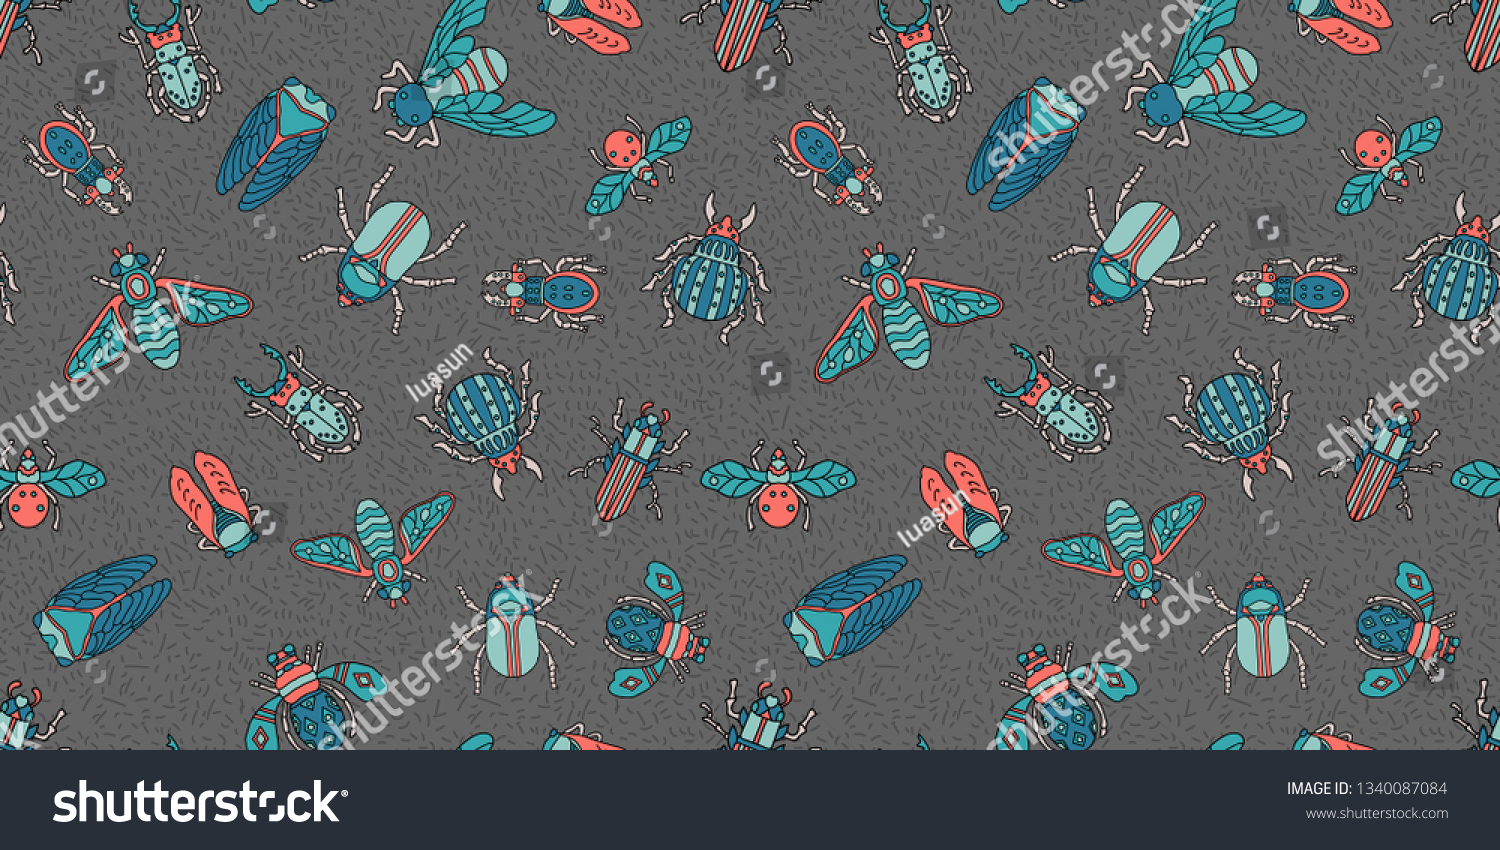 SVG of beetles, fly maryls, insects seamless pattern doodling svg